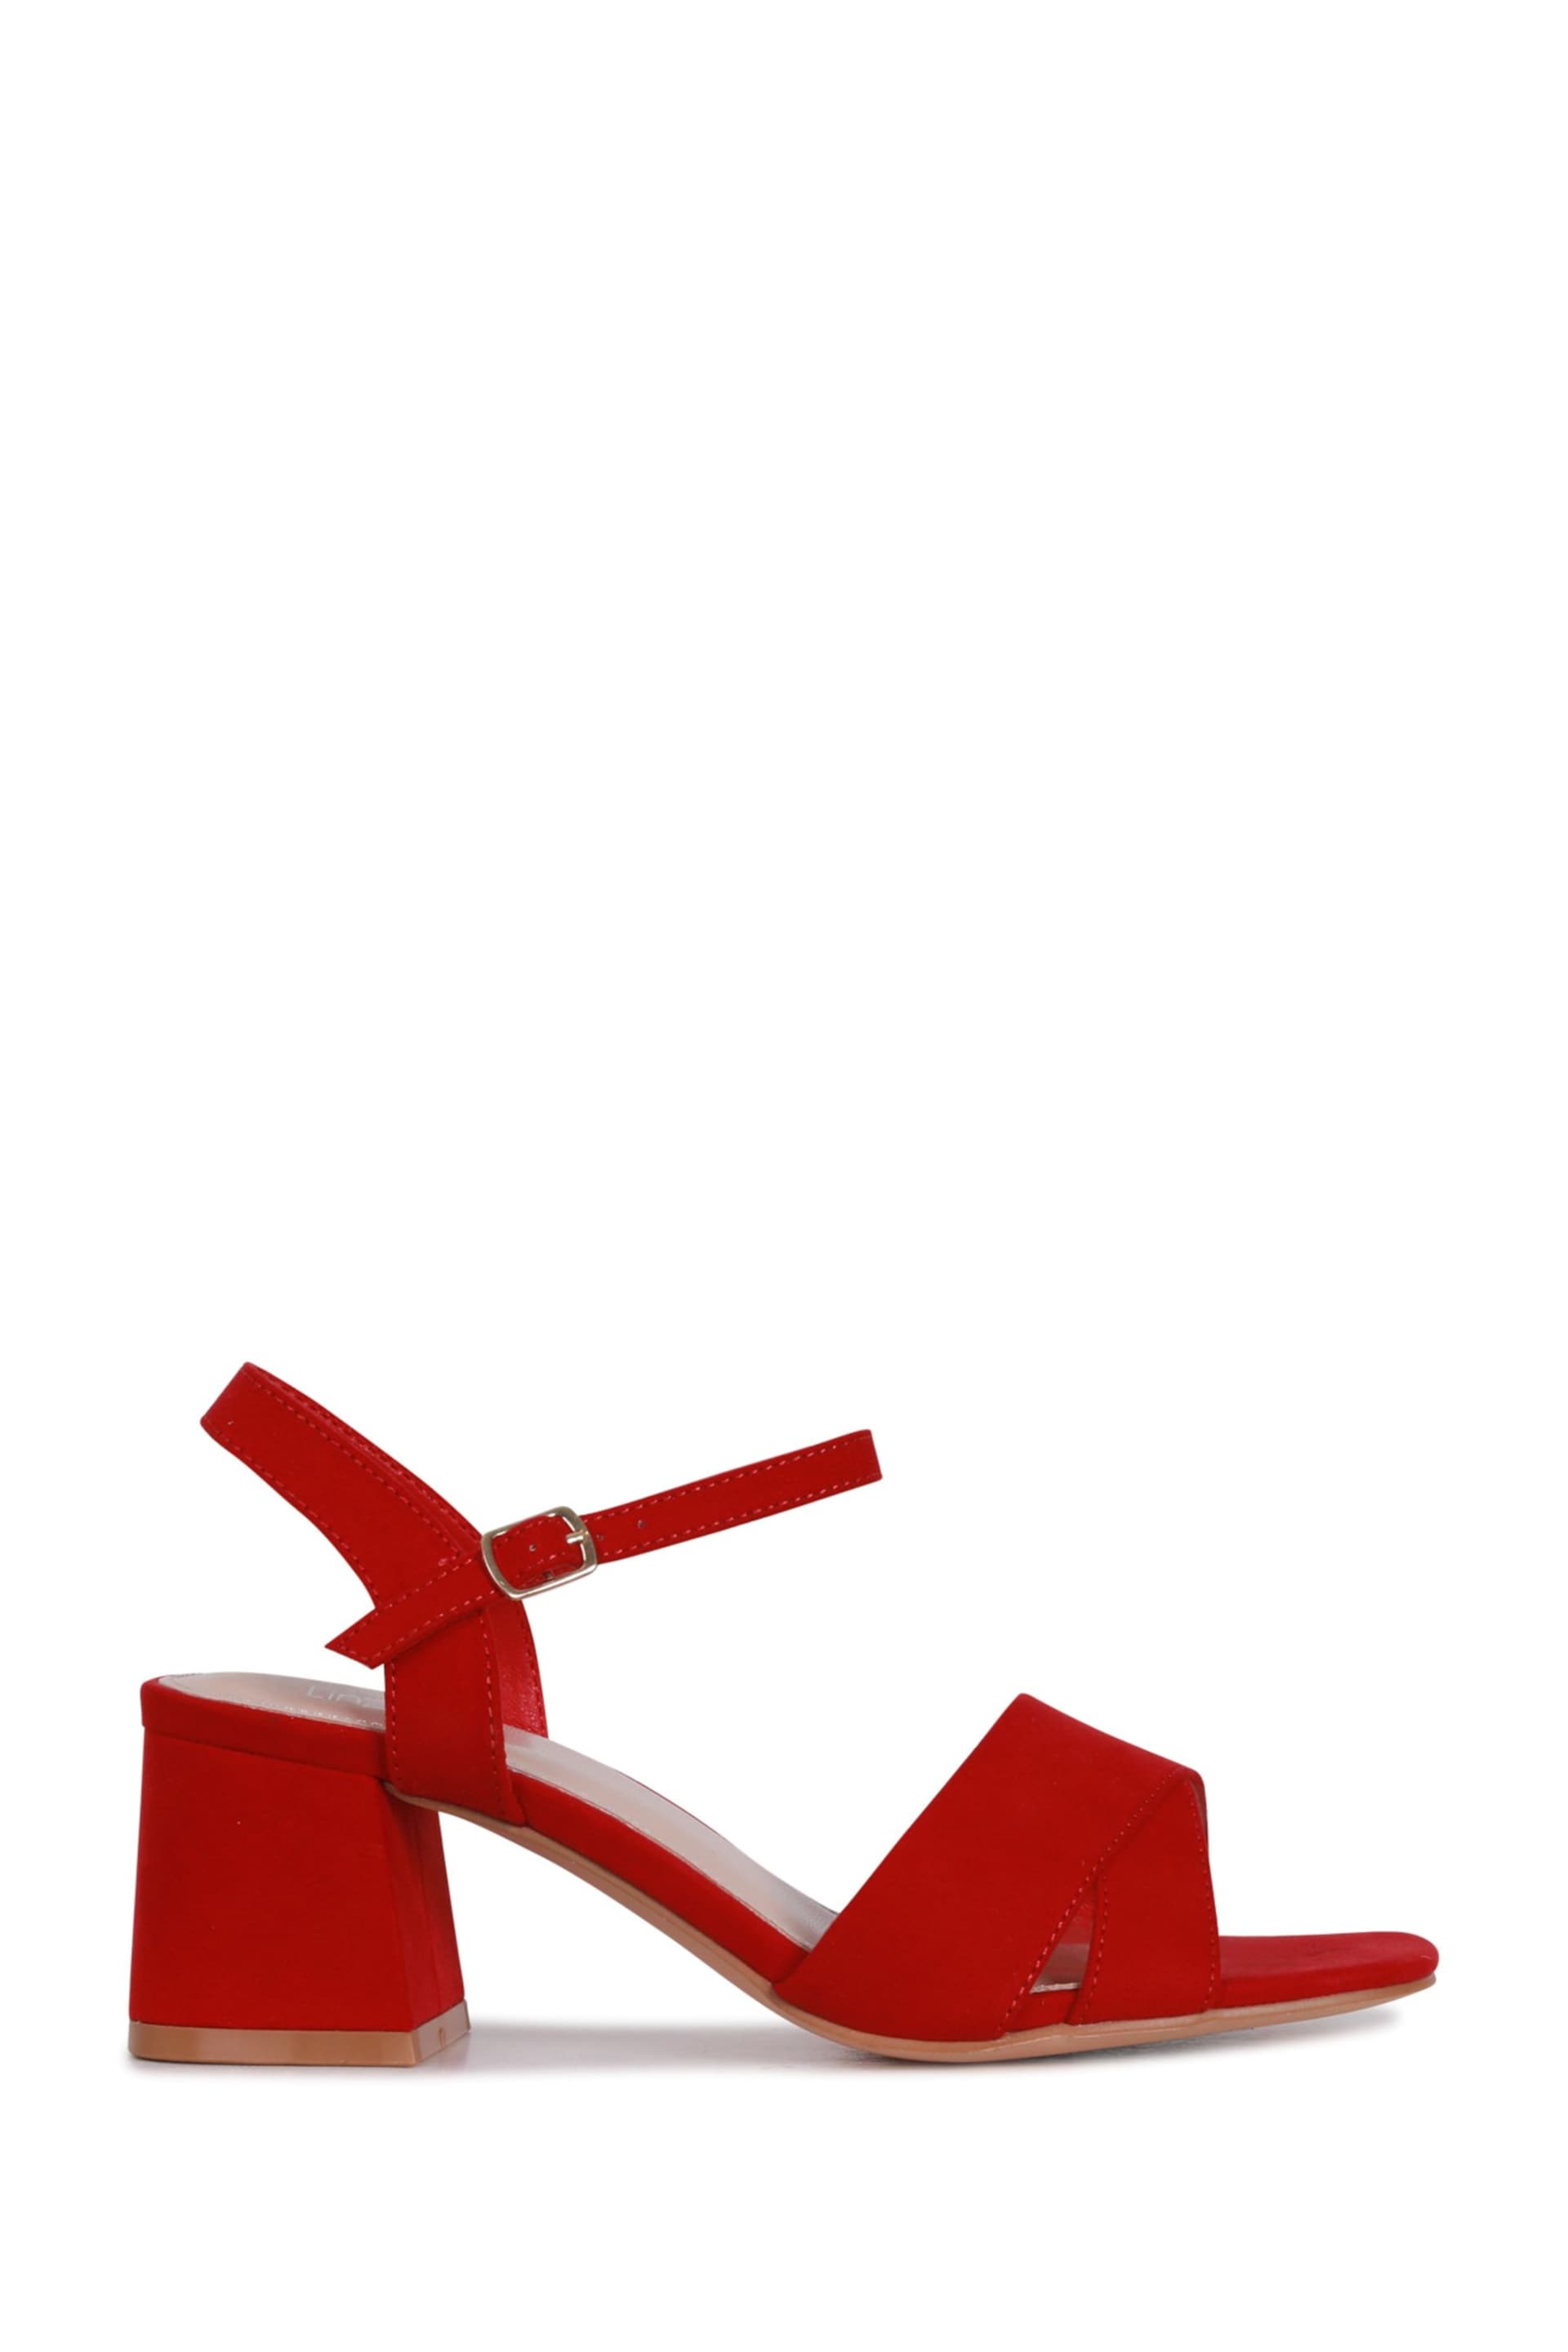 Linzi Red Vivian Wide Fit Heeled Sandals With Crossover Front Strap - Image 2 of 4